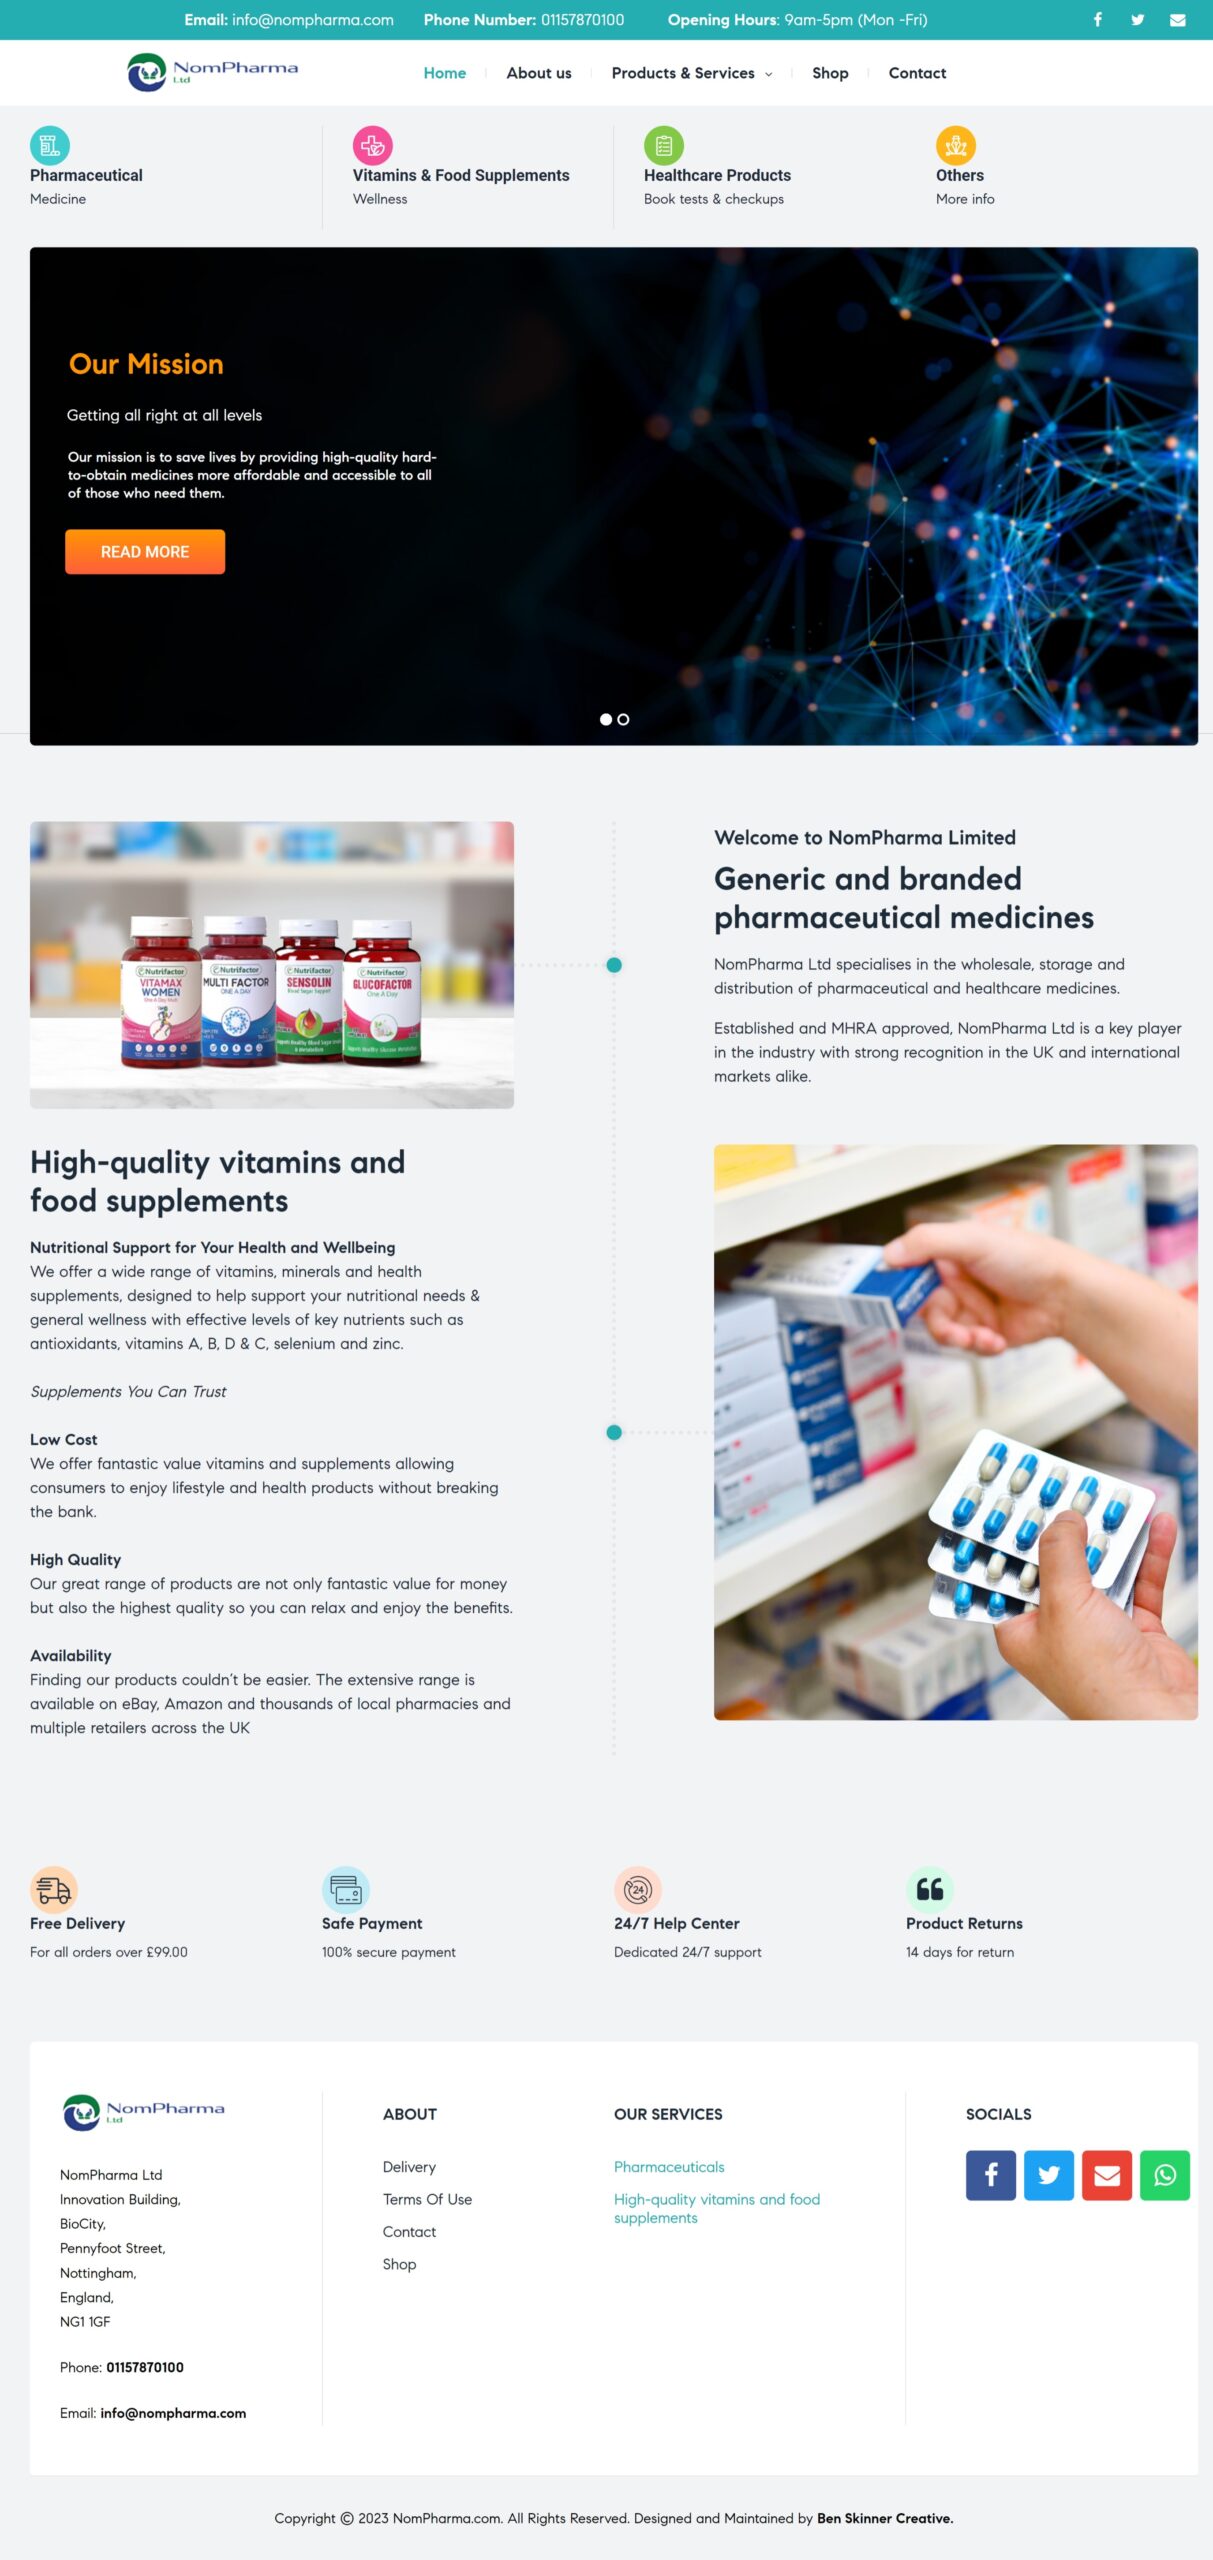 NomPharma Pharmaceutical Website Homepage Refresh - Online Visibility and Sales Growth